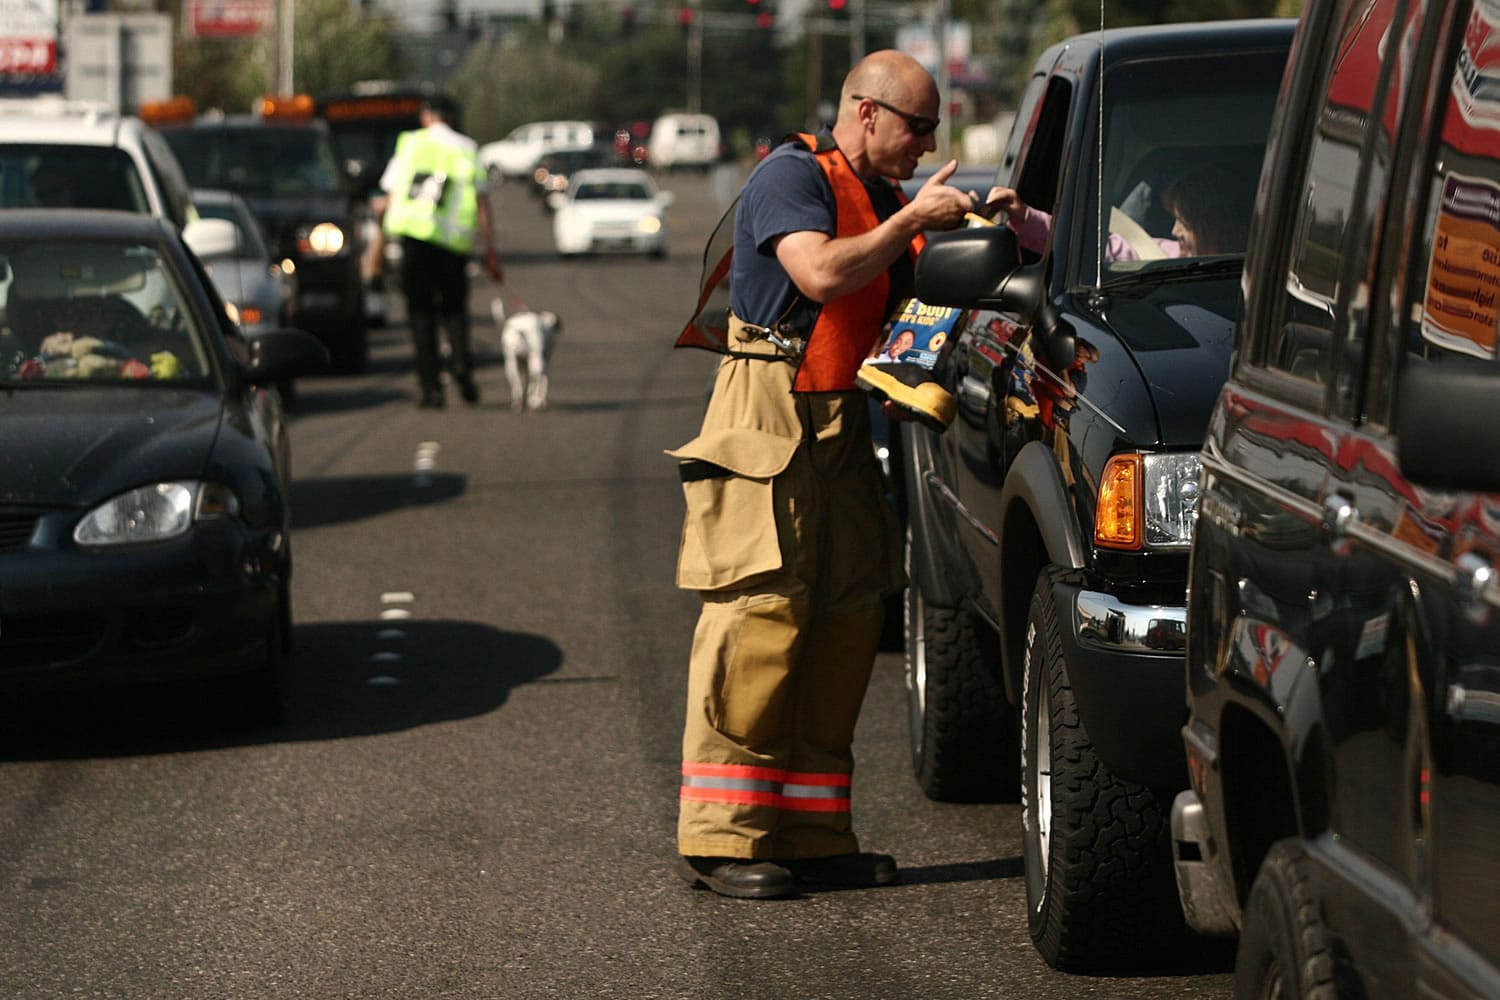 Firefighter/paramedic Erik Rosendahl collects a donation at the 'Fill the Boot' fundraiser near the corner of Fourth Plain and Andresen in September 2006. In 2011, the city of Vancouver told the firefighters union that it would not be allowed to use city streets for its annual fundraiser and held it in the unincorporated county.